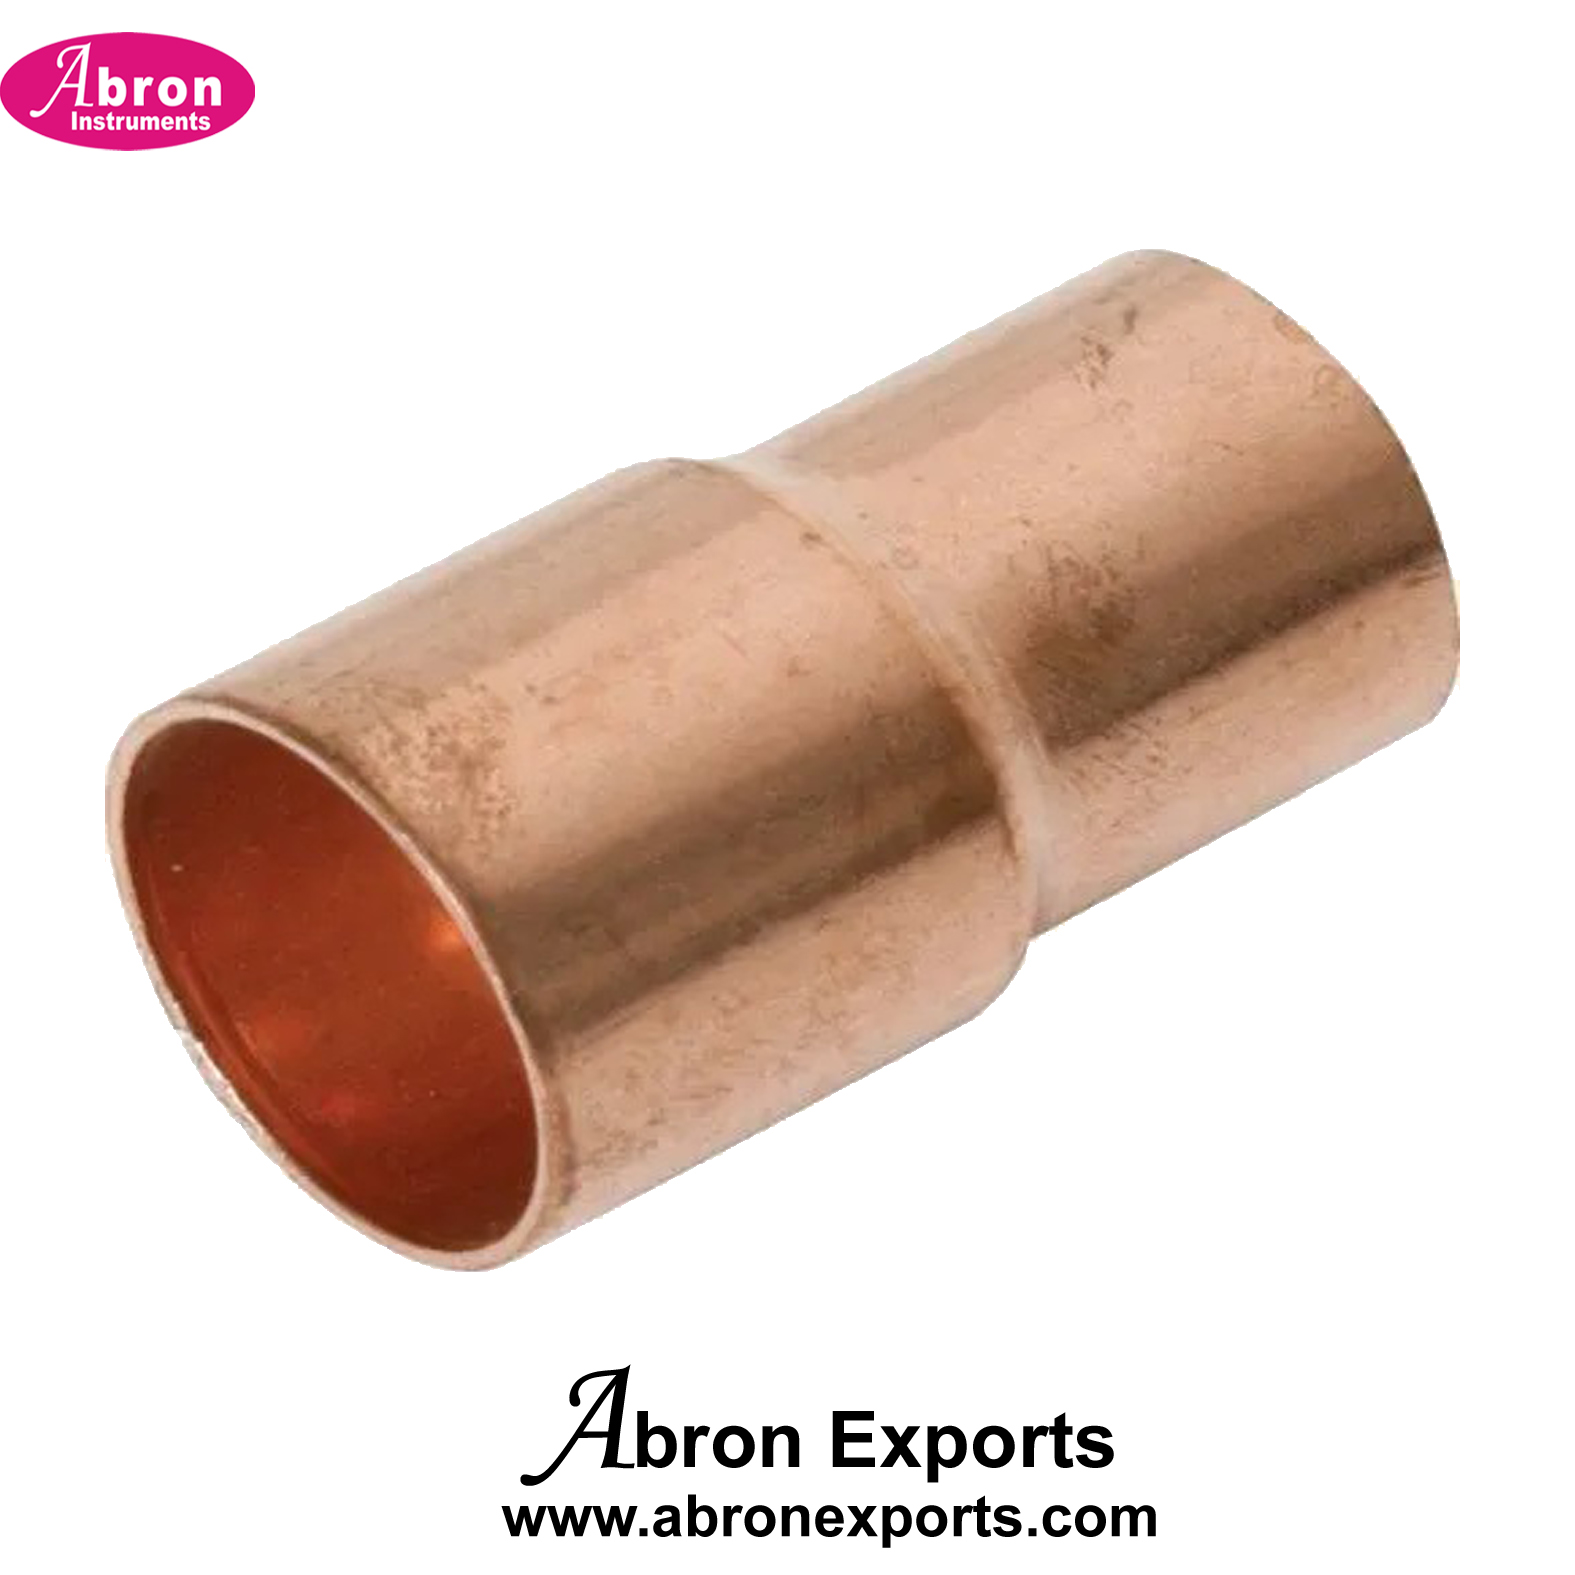 Medical gas Pipe Line spare coupler Reducer copper 22 to 15mm Pack of 100 Abron ABM-1121PR15